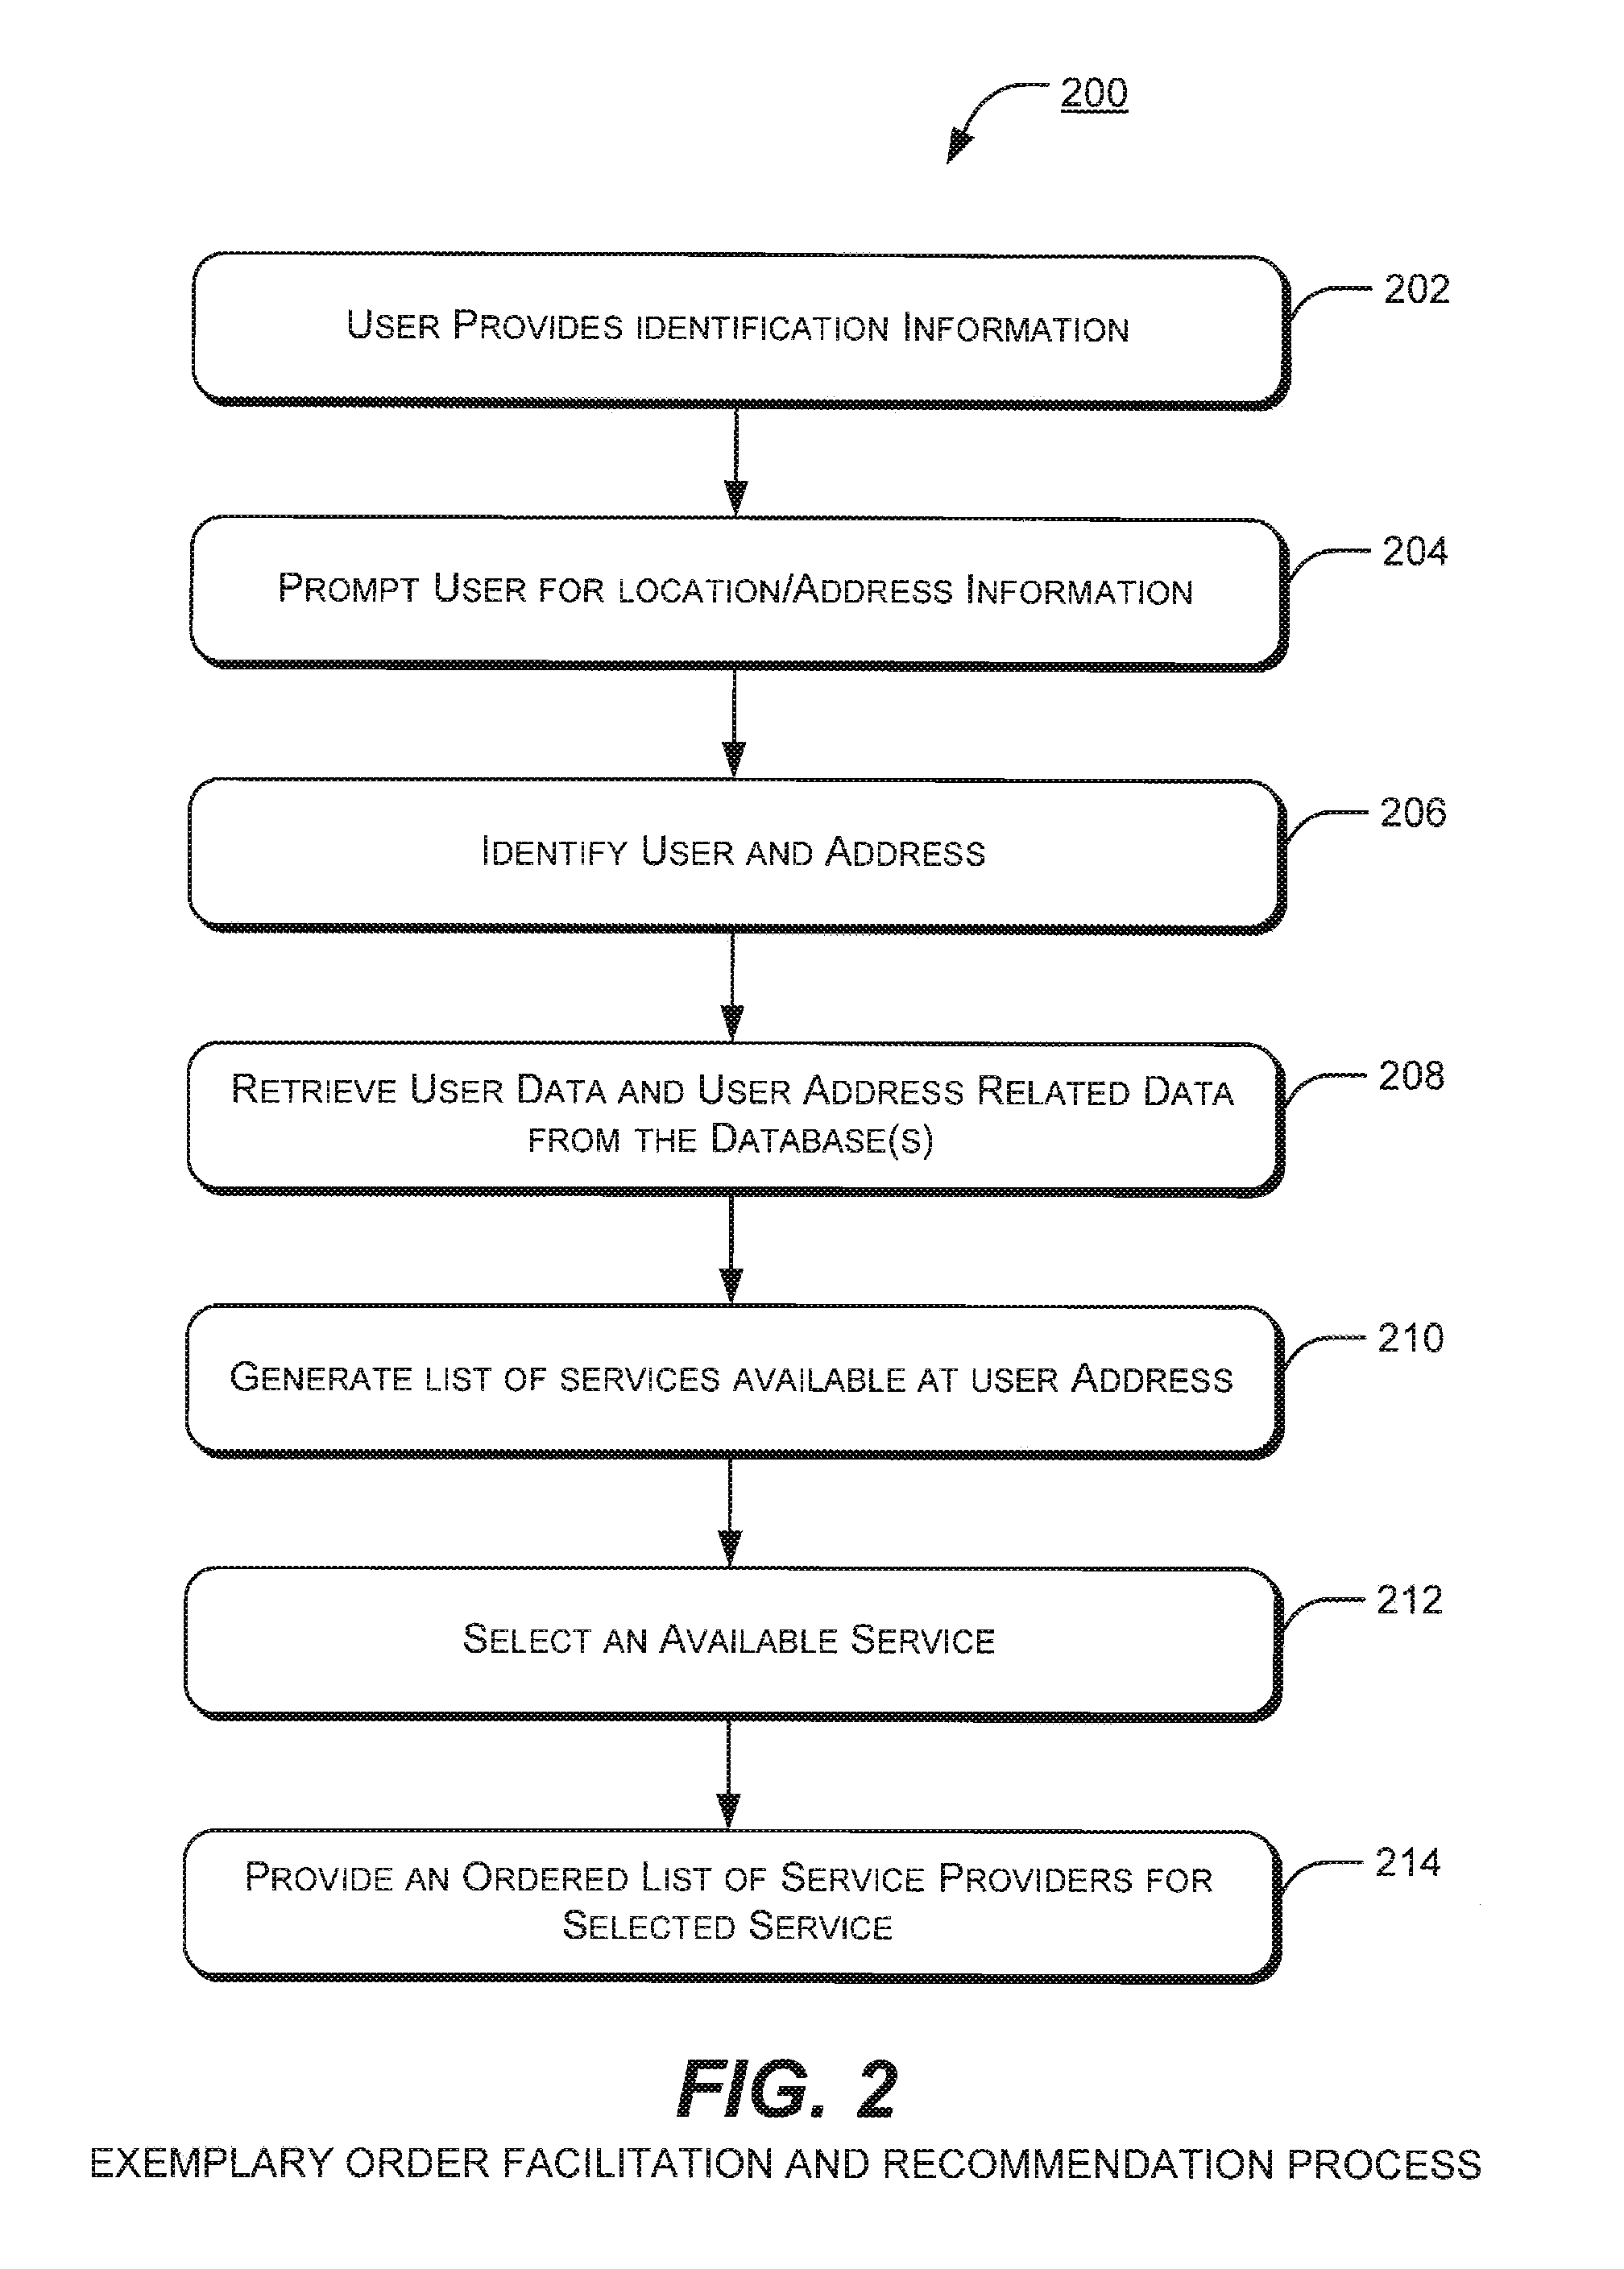 Systems and methods for recommending third party products and services